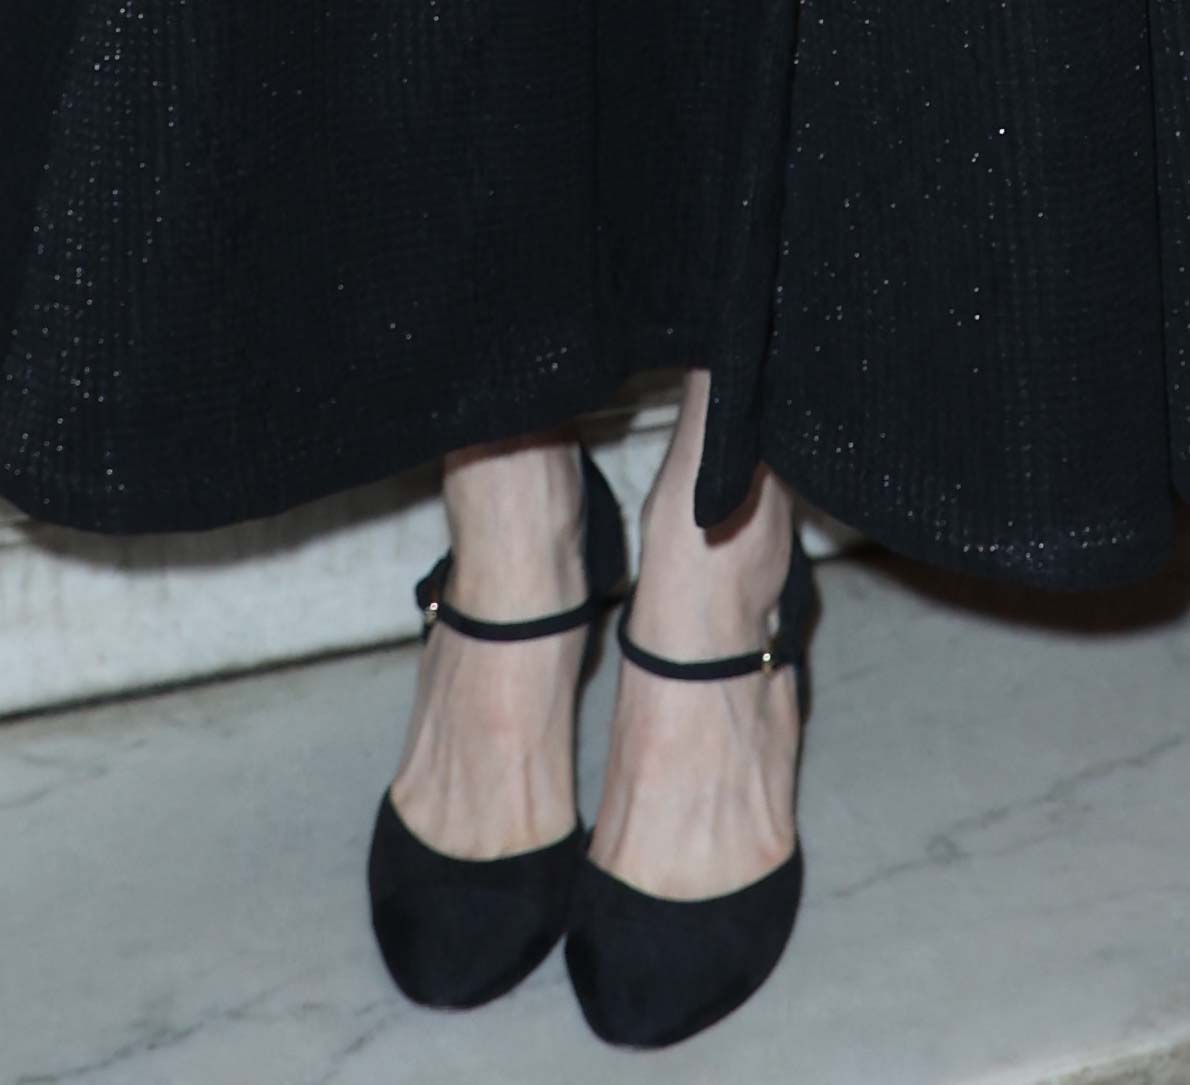 Michelle Williams teams her black A-line dress with black Chanel Mary Jane pumps featuring the house's iconic tonal toe caps